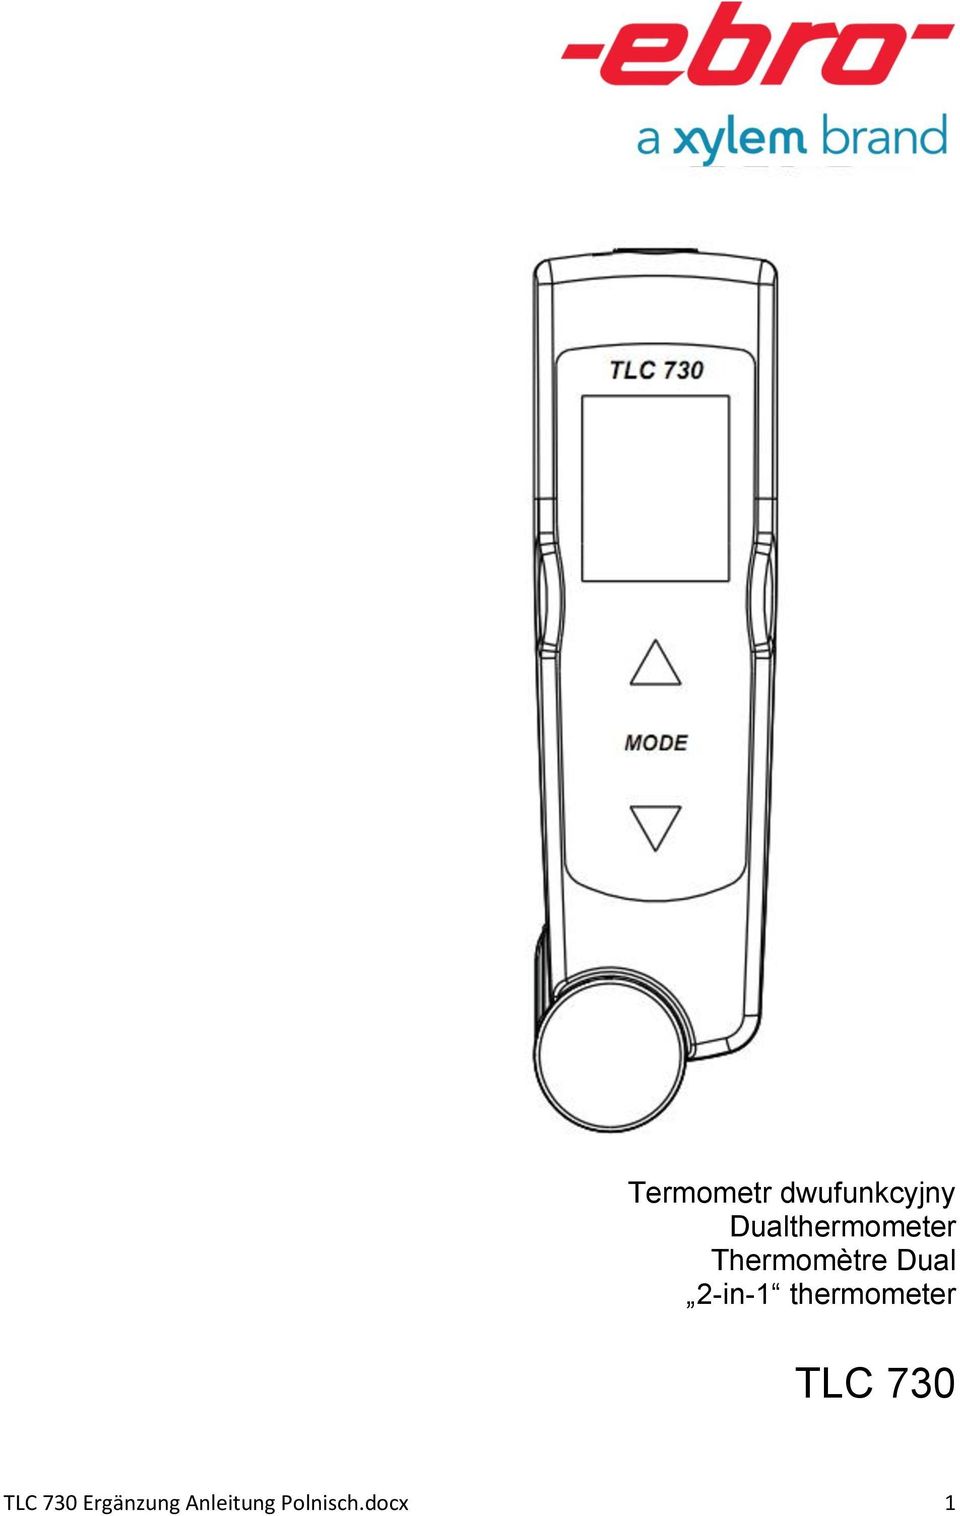 Dual 2-in-1 thermometer TLC 730